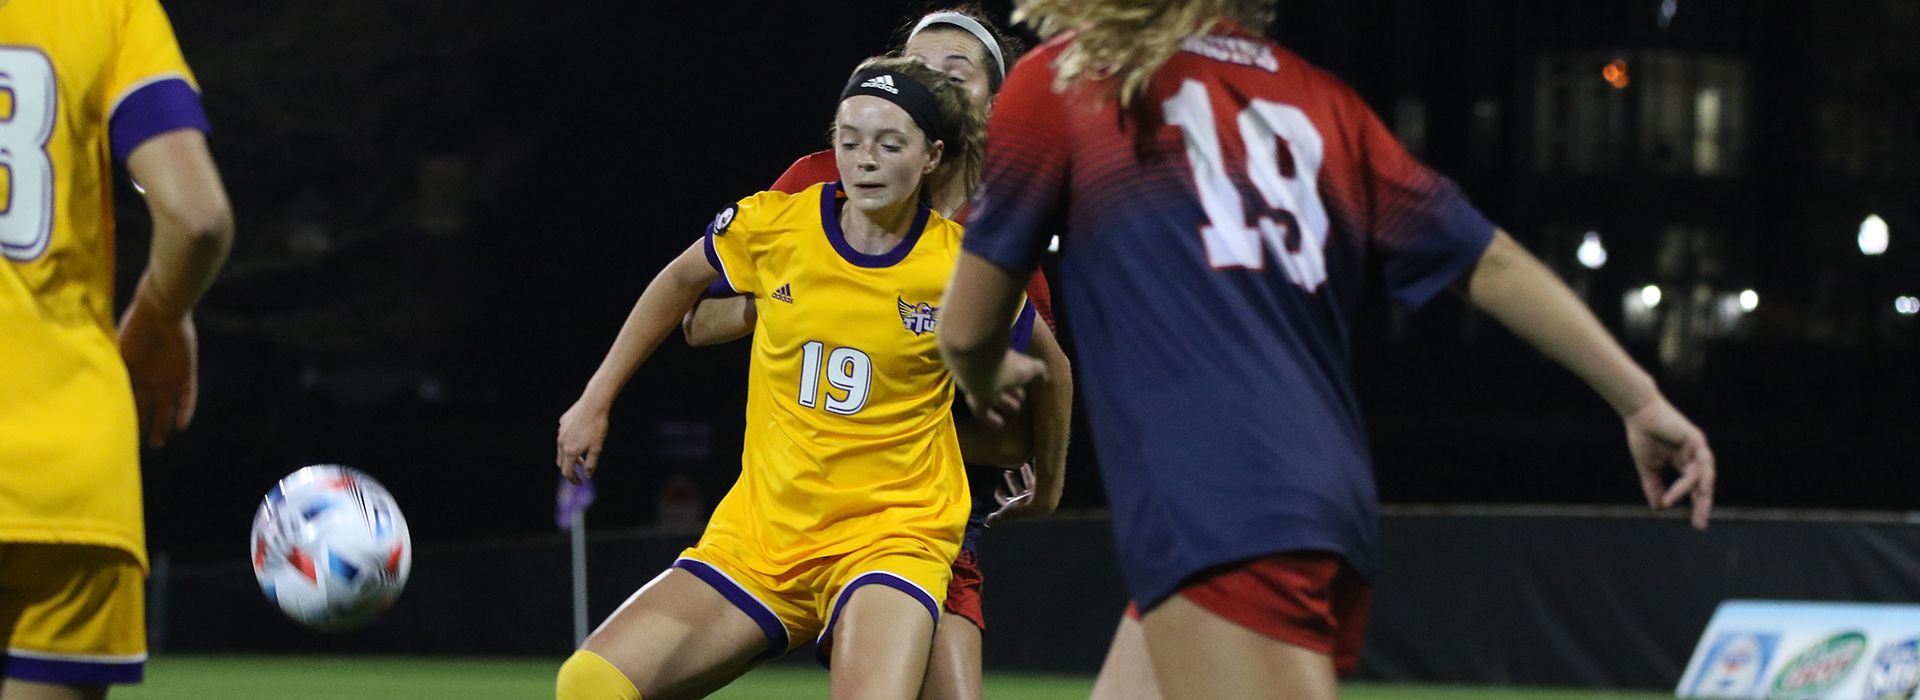 Tech’s unblemished record goes by the books with 1-0 loss to Belmont